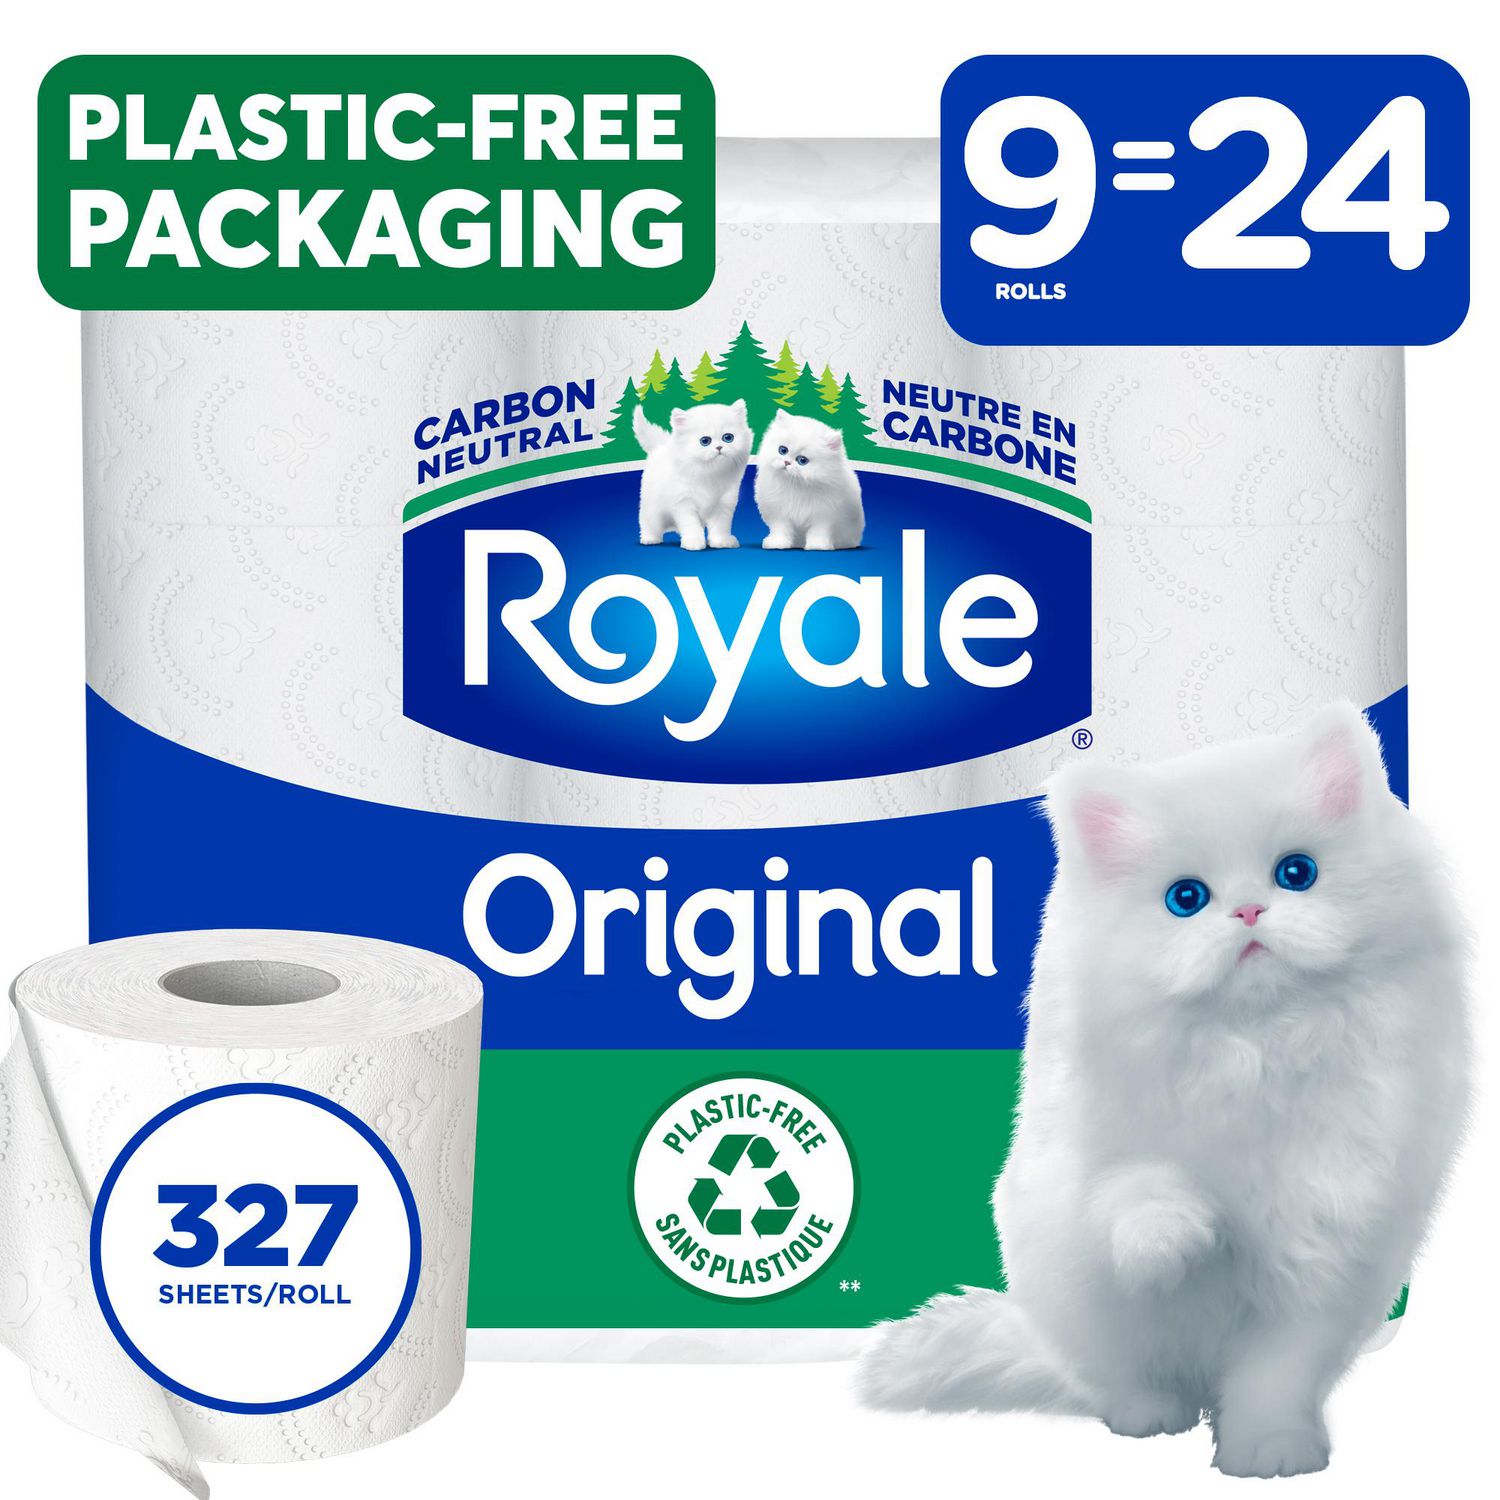 Royale Original Recyclable Paper Pack, 9 Equal 24 Toilet Paper